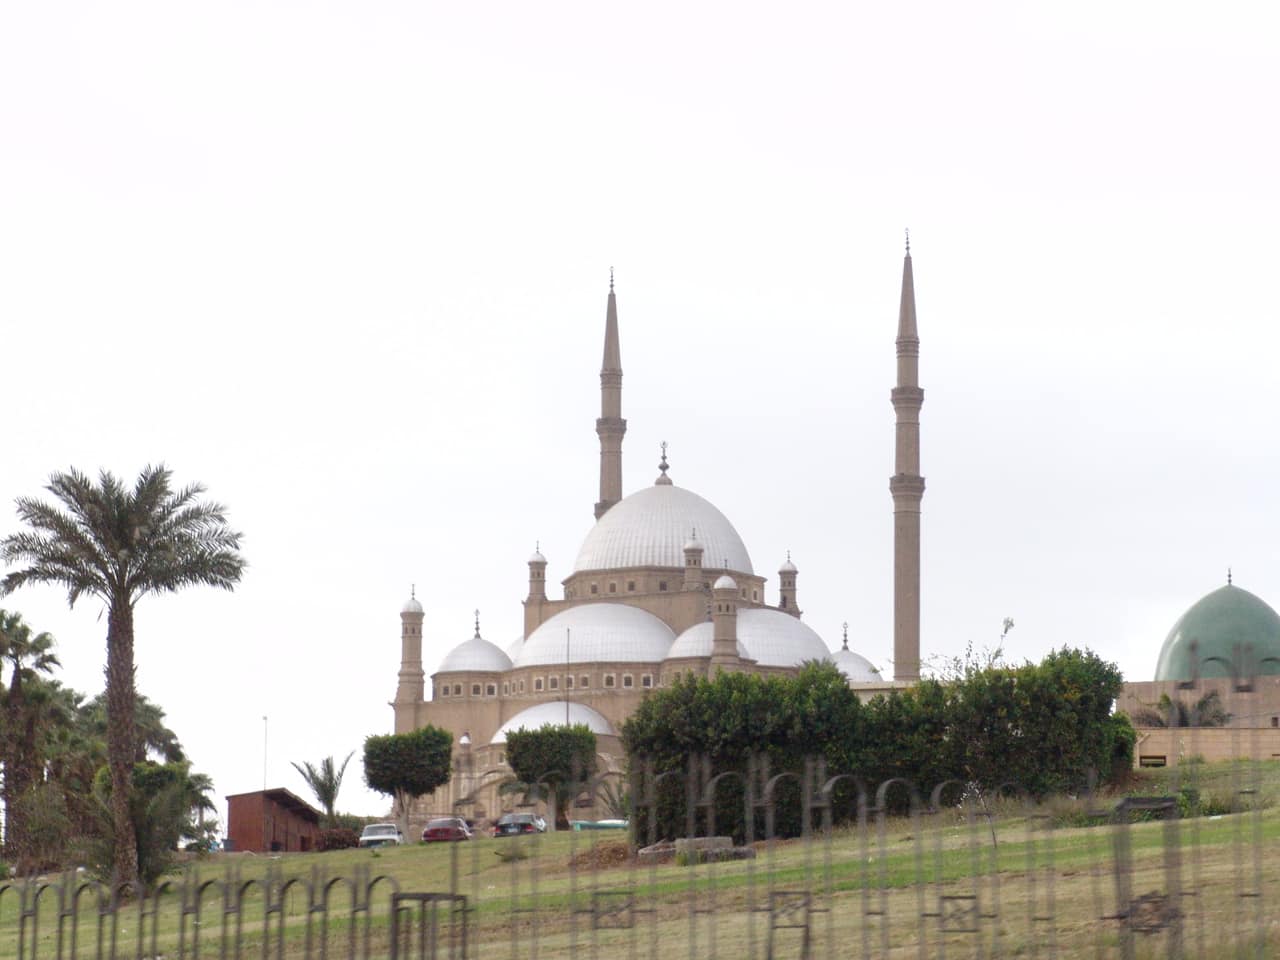 Mosque of Mohammad Ali in Cairo, Egypt